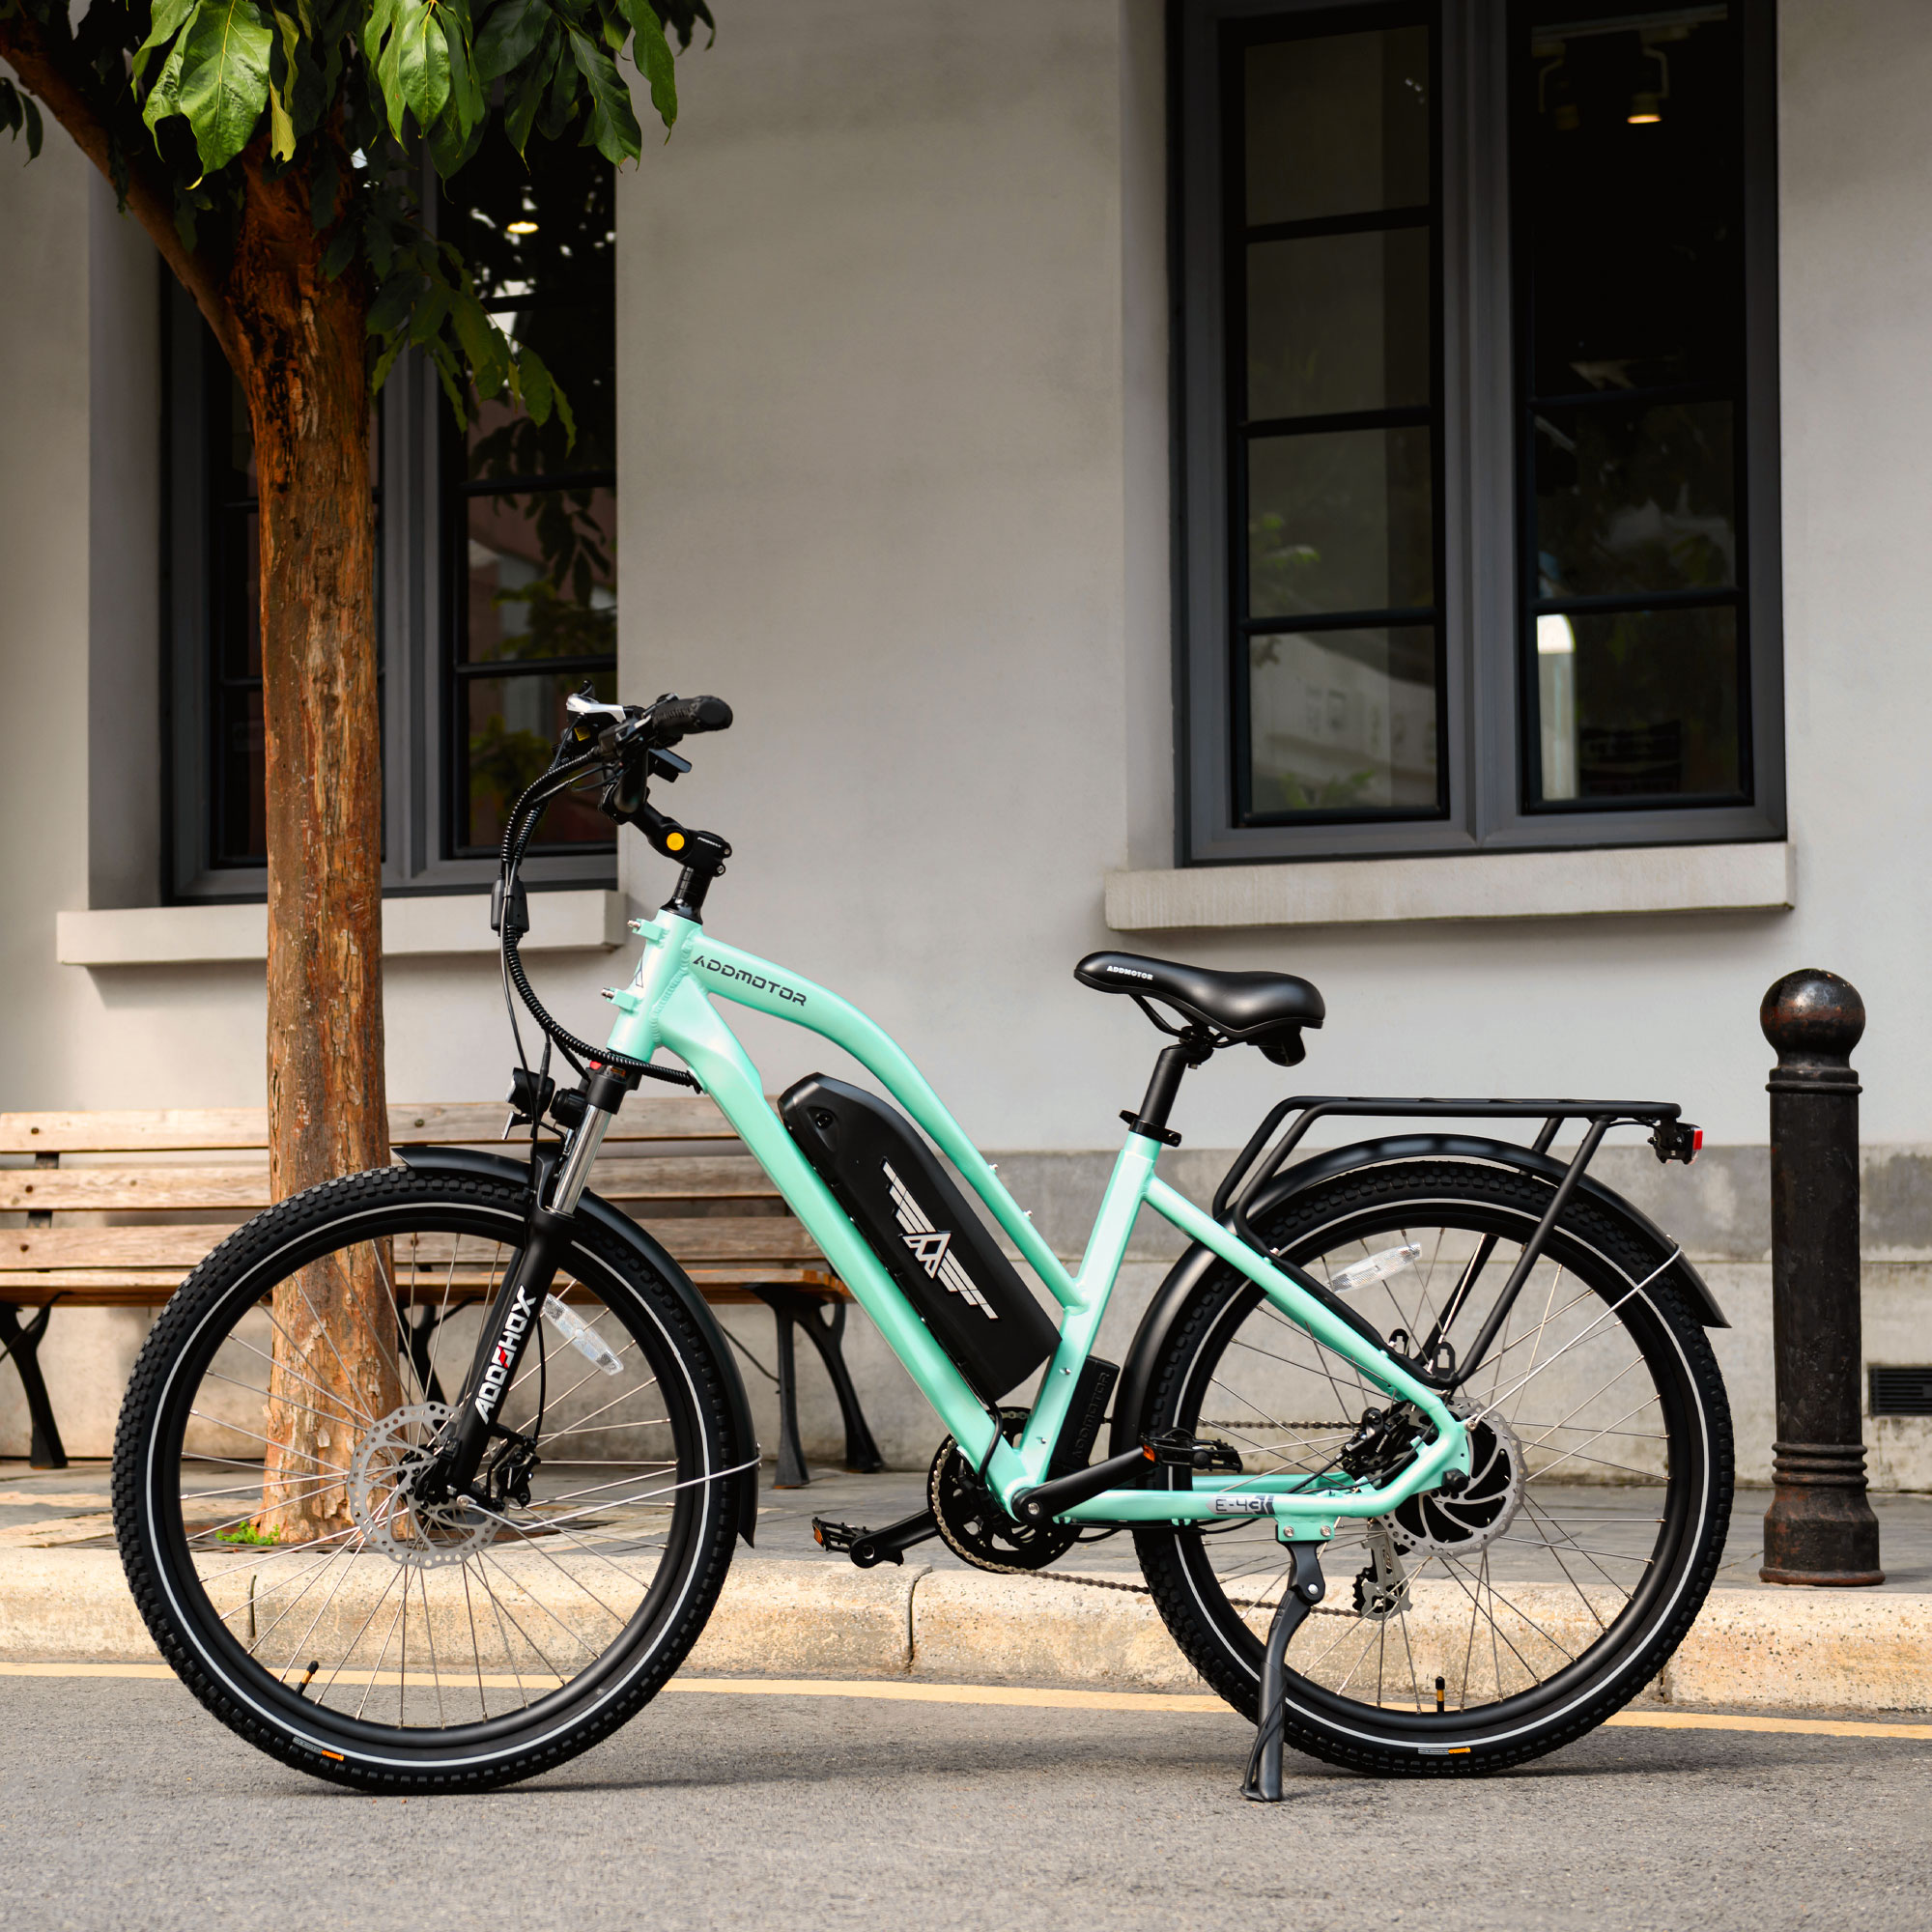 The Best Electric Bikes for City Cycling